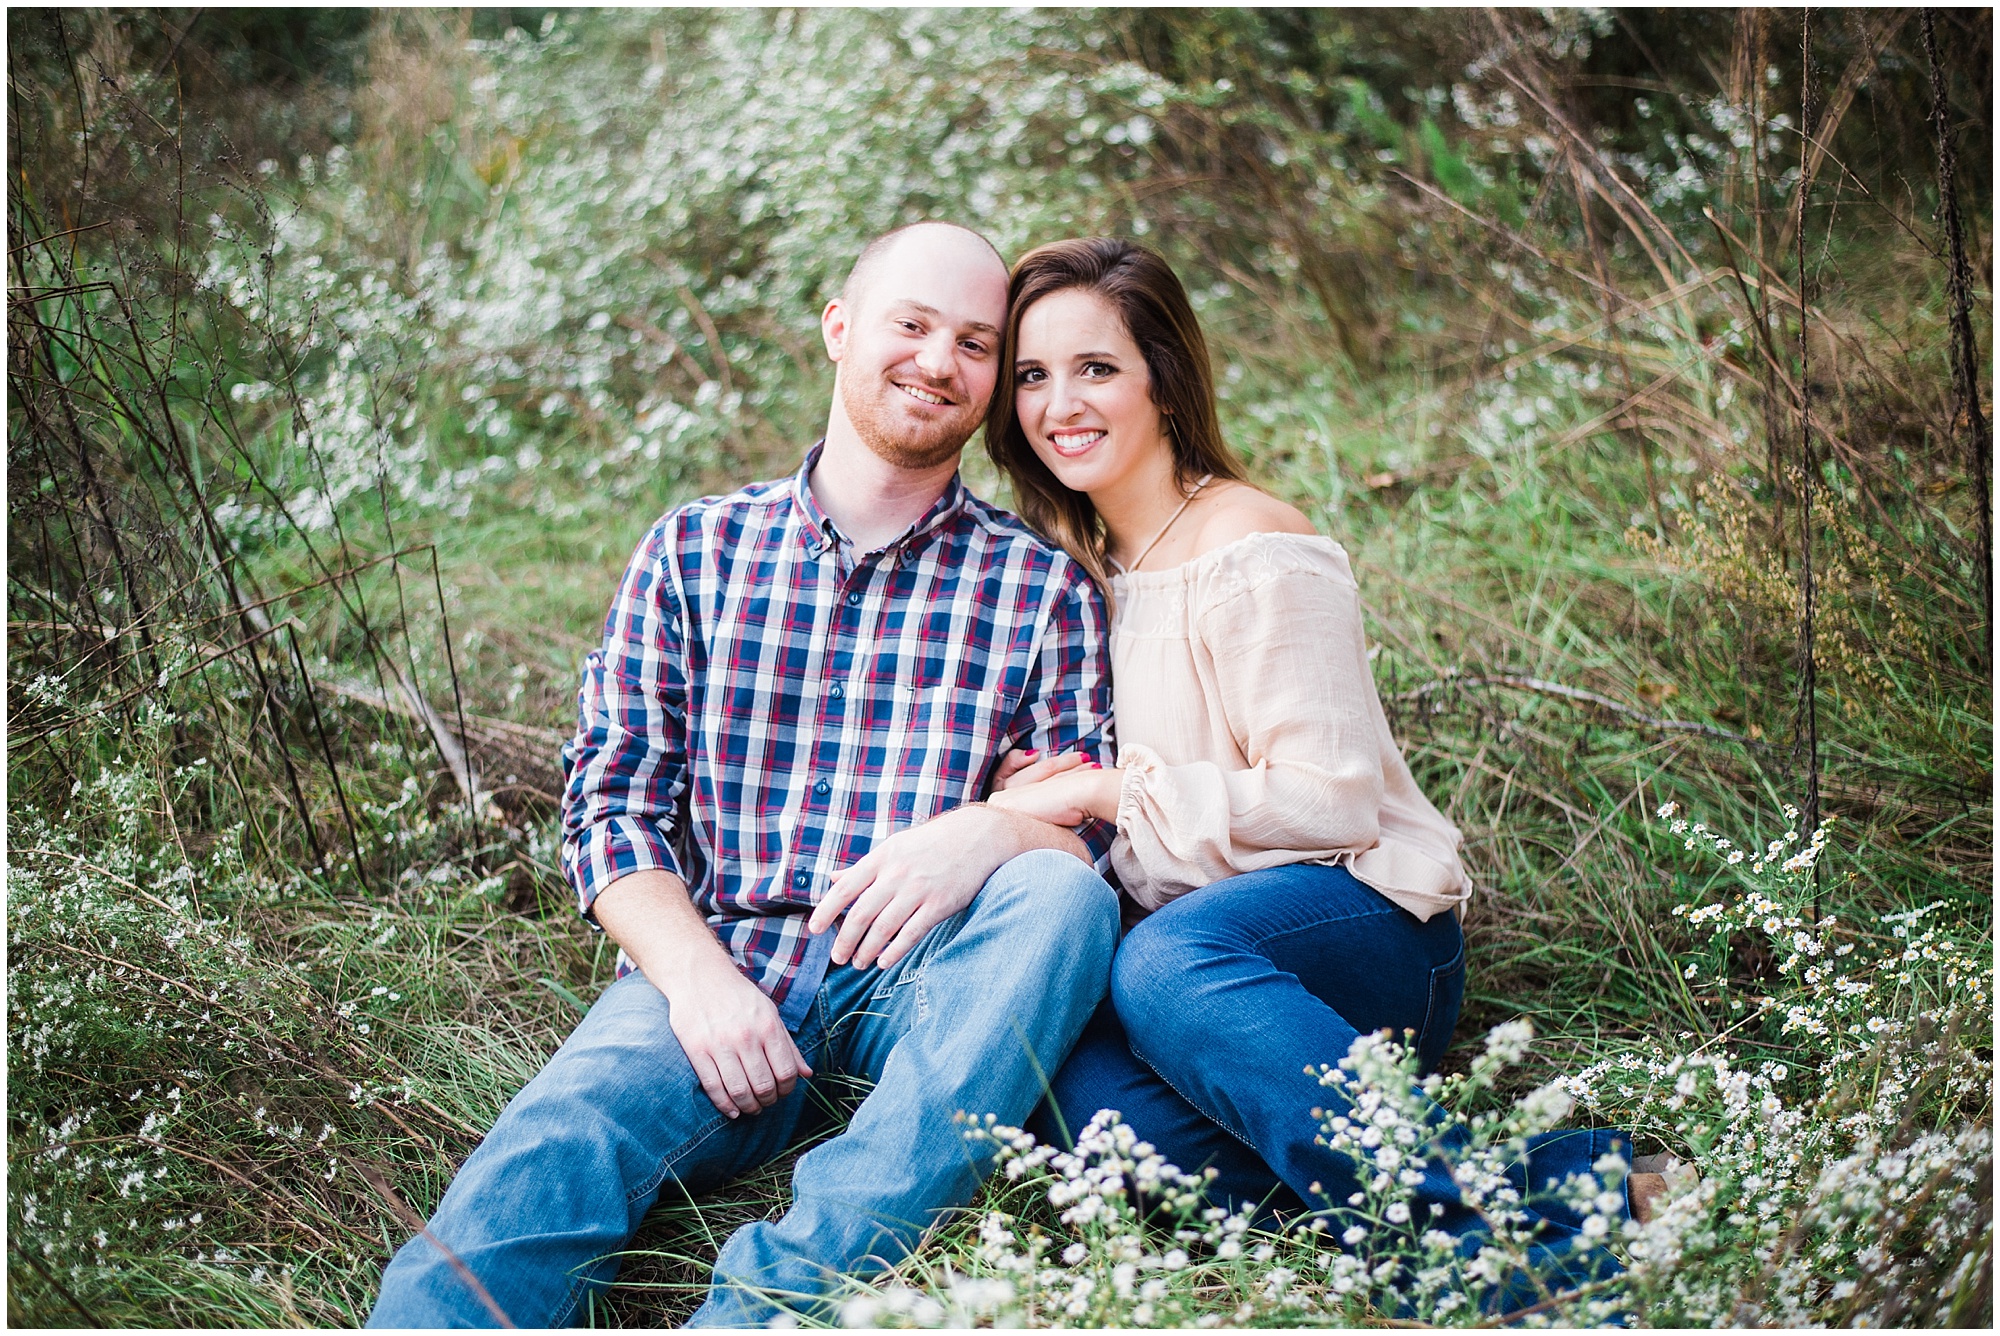 Mallory and Drew || Wedding Photographer || Moss Rock Engagement Session || Hoover, AL